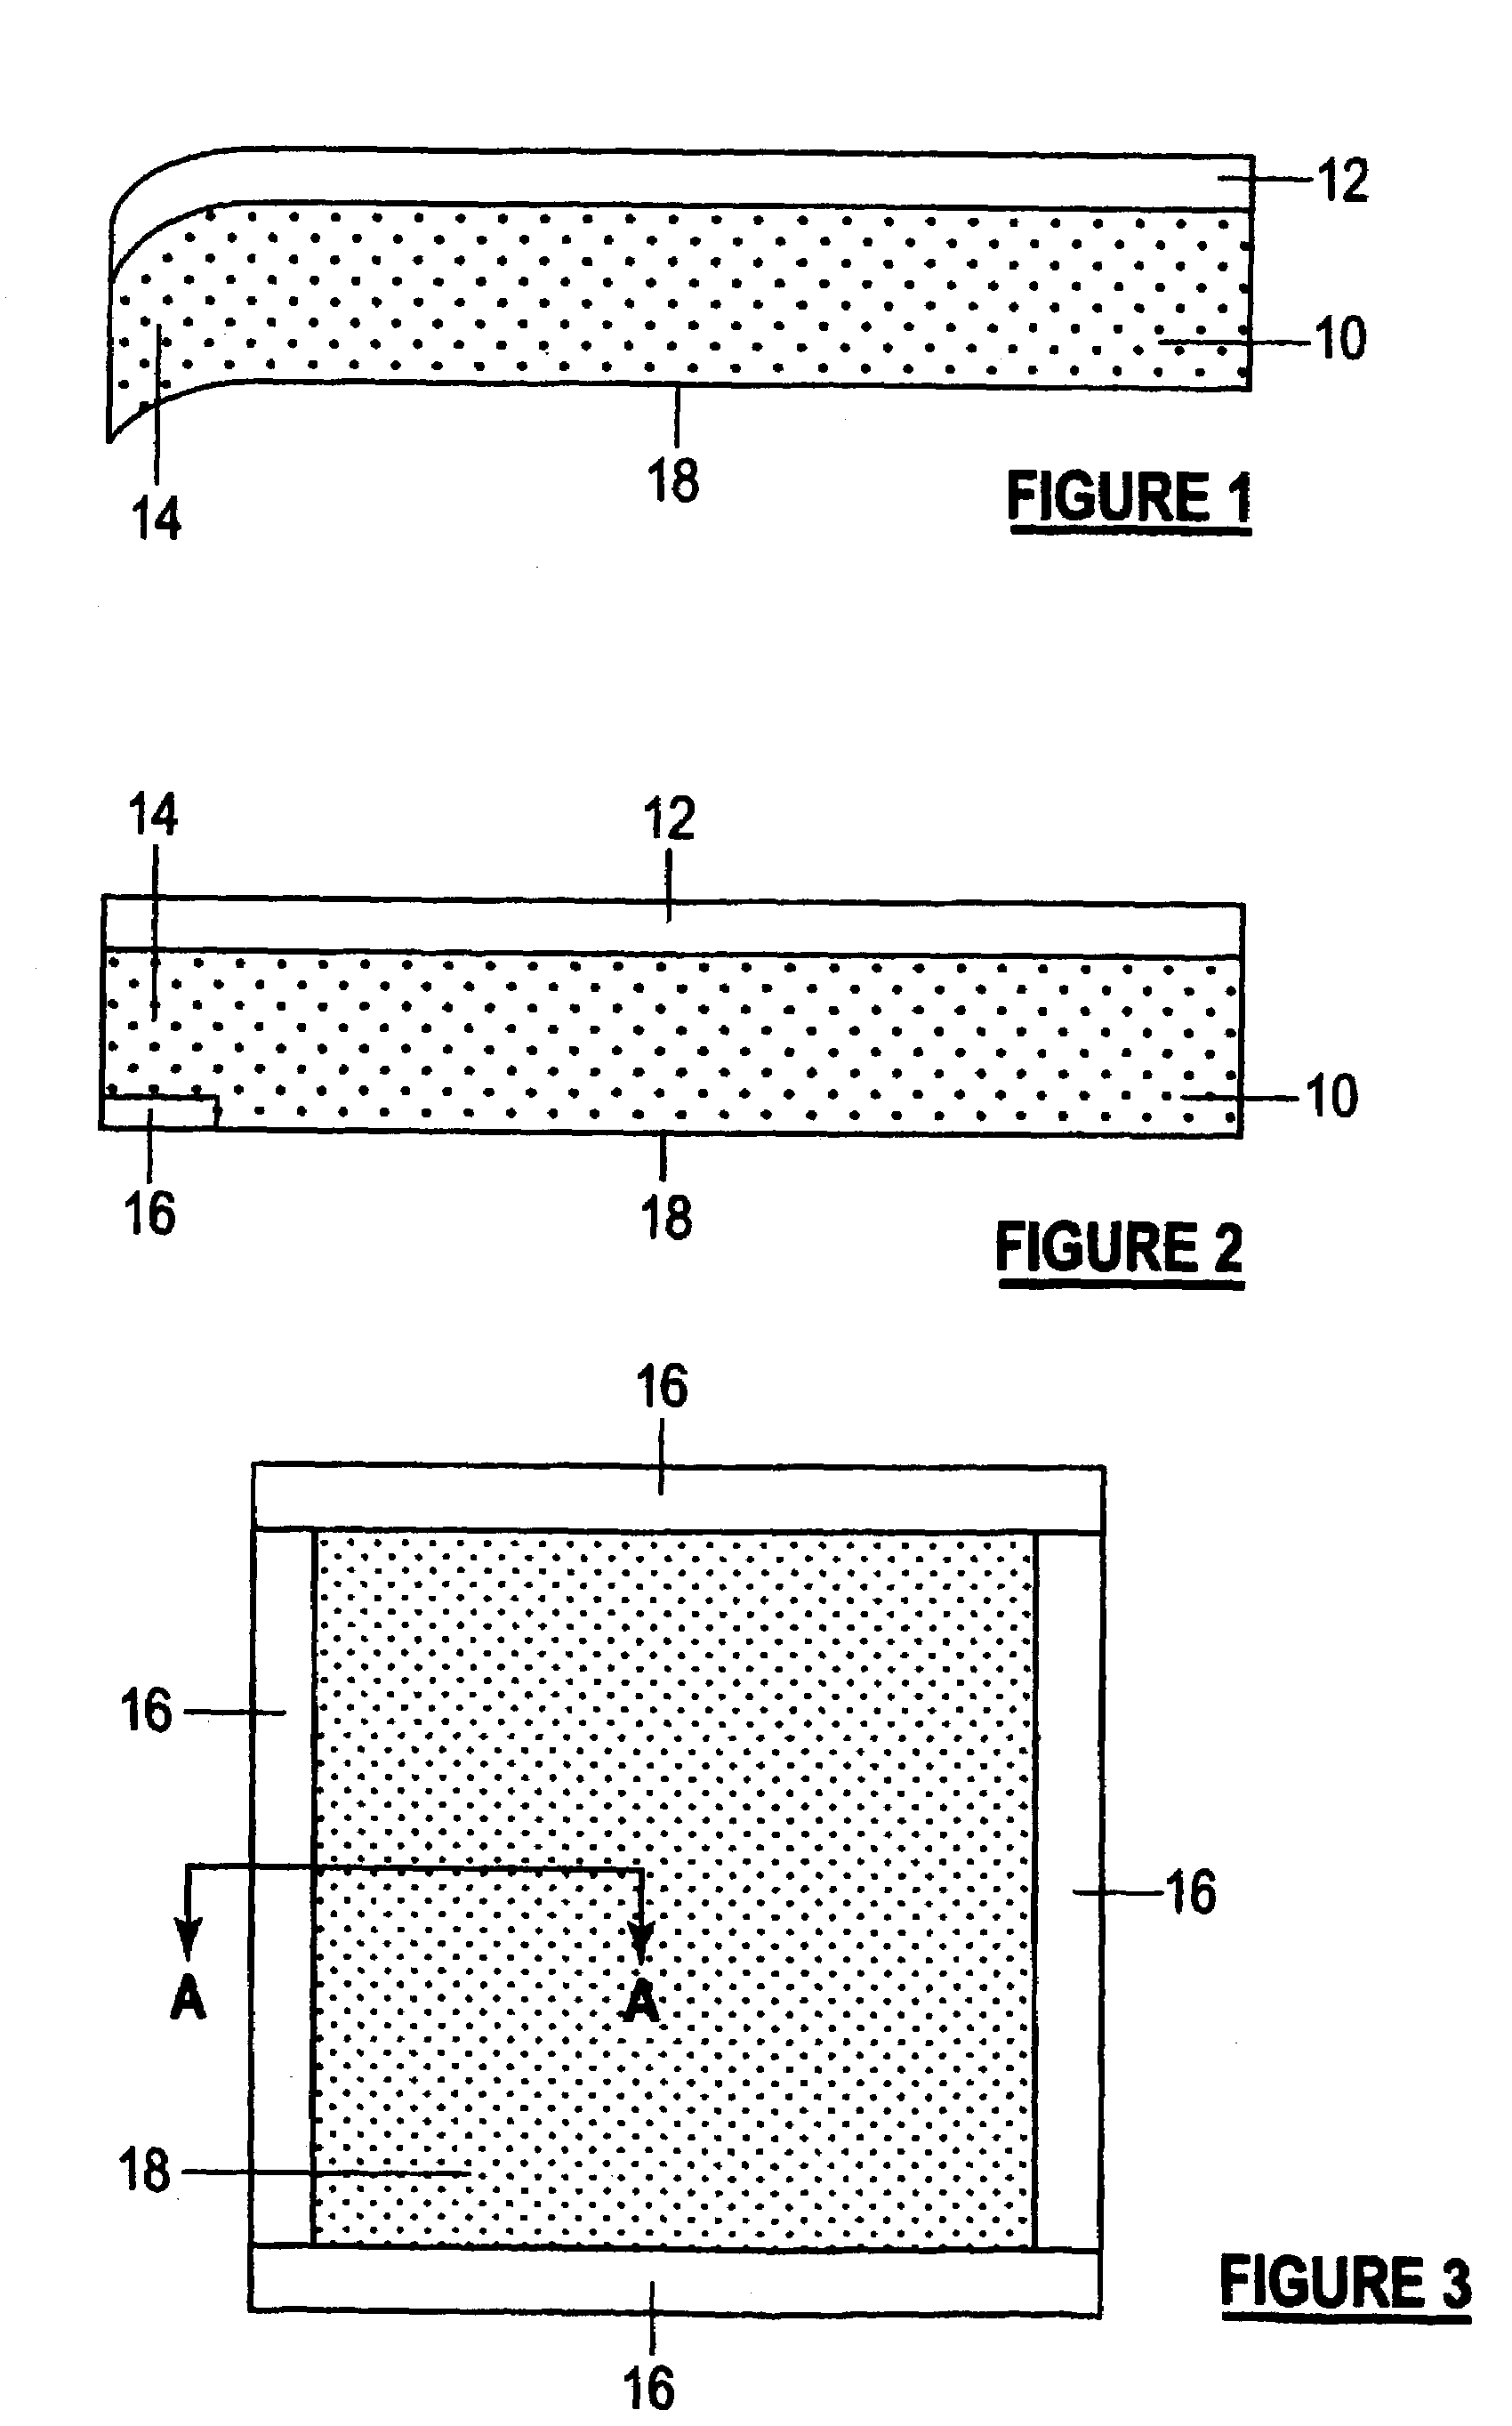 Laminated structure and method of forming same